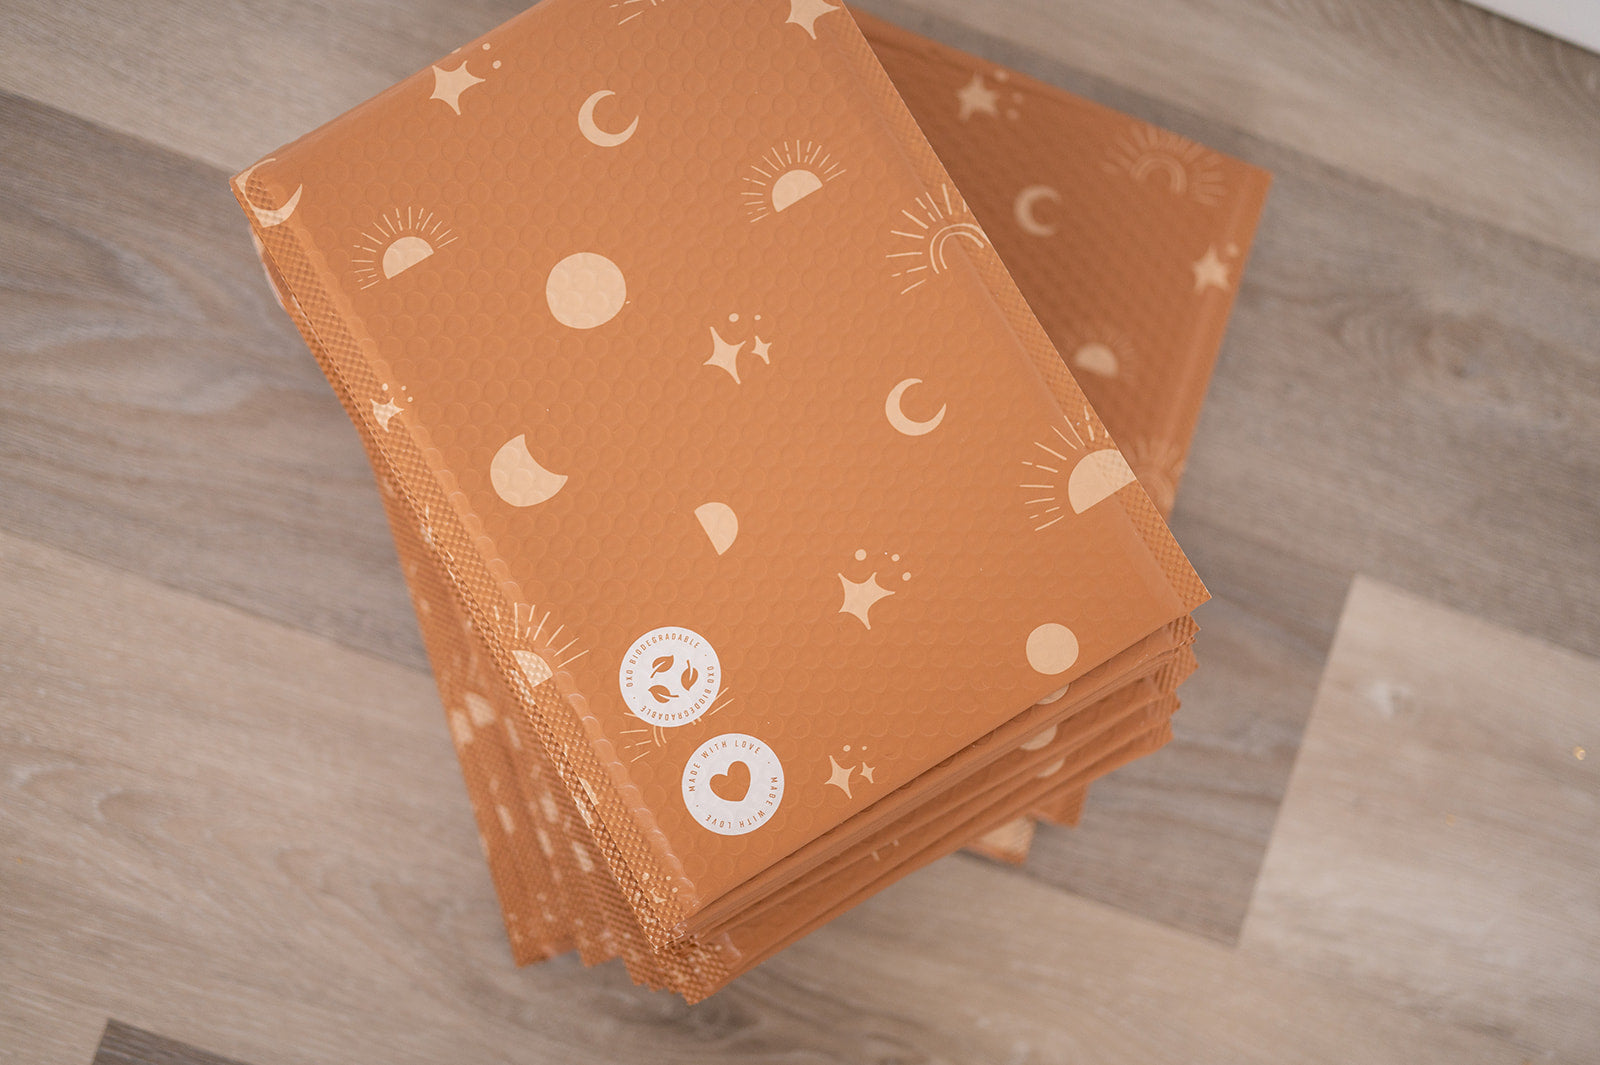 A stack of Celestial Tan Biodegradable Bubble Mailers 8.5" x 12" from impack.co on a wooden floor.